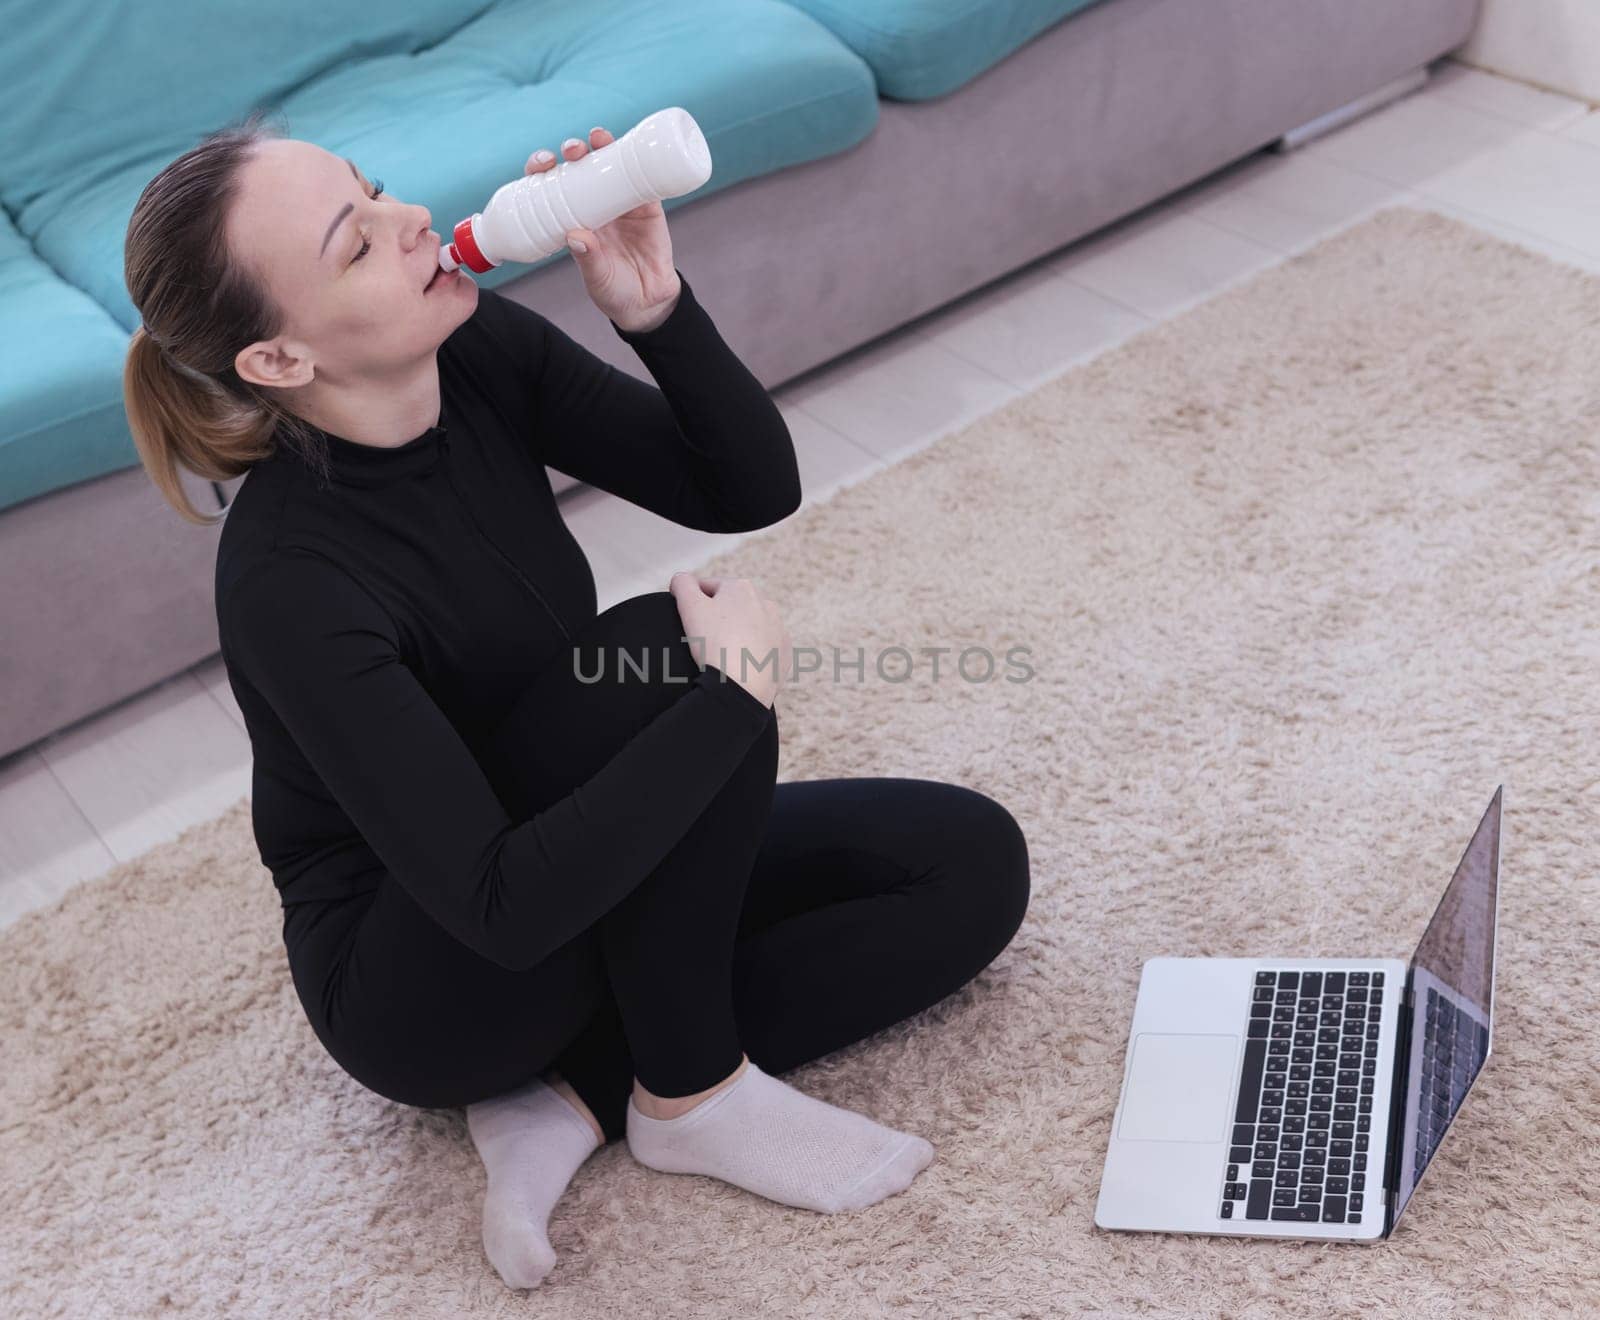 A middle-aged athletic girl with blond hair with a ponytail, Caucasian nationality in black sportswear sits on the floor with dumbbells and drinks water from a bottle uses a laptop at home.